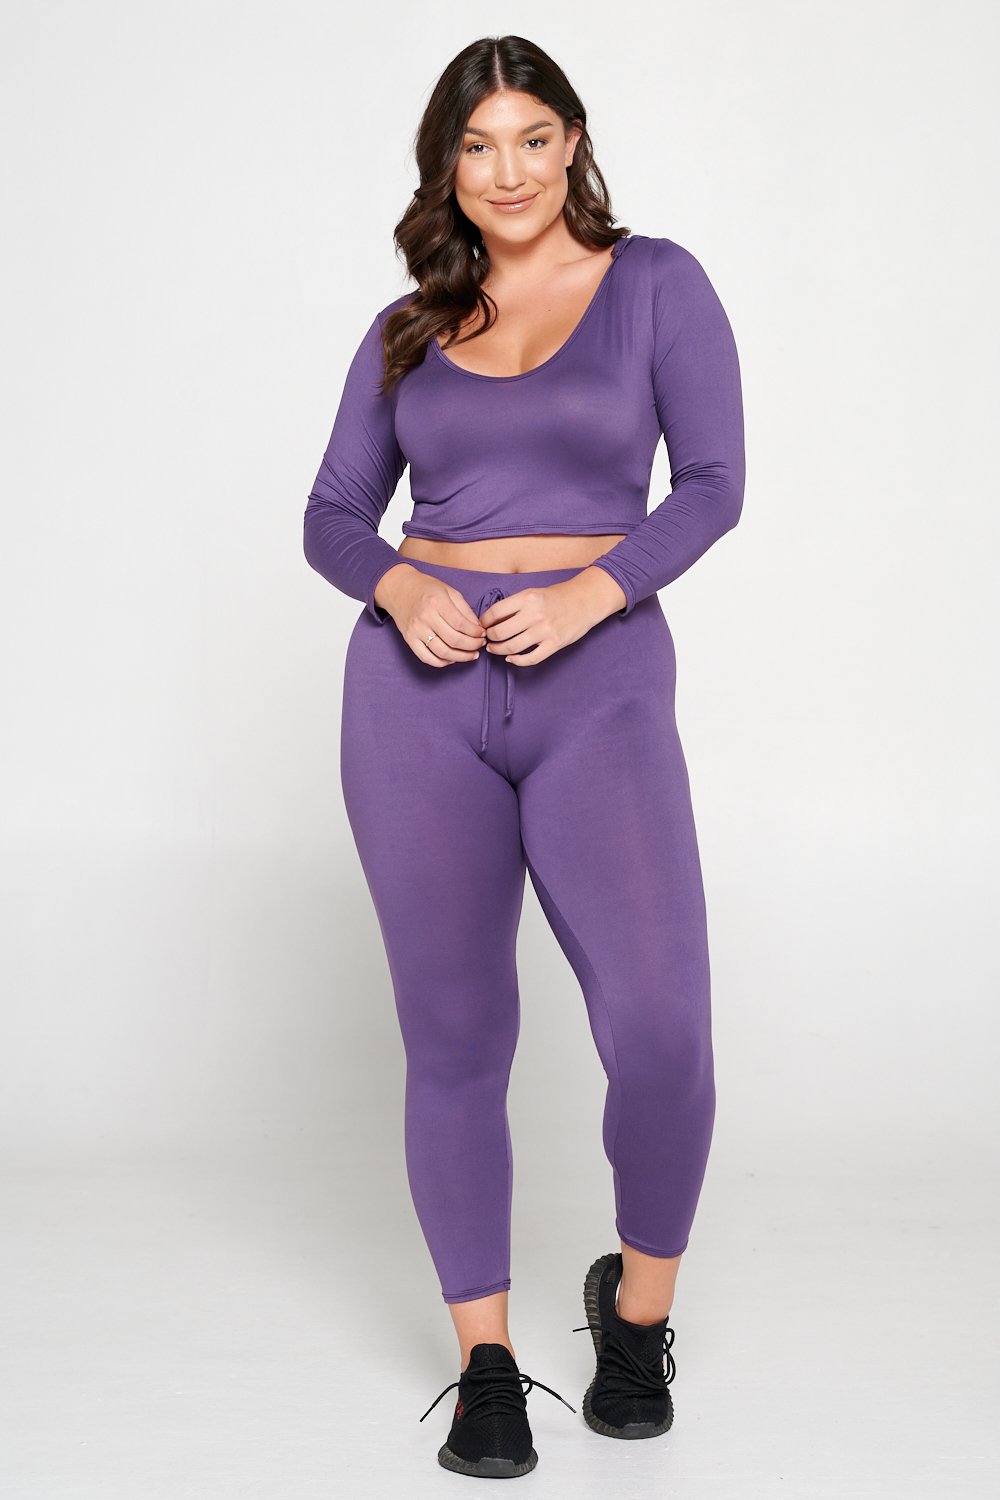 livd L I V D women's contemporary plus size  scoop neck crop hoodie and elastic band sweatpant with faux drawstring in dusty wine purple